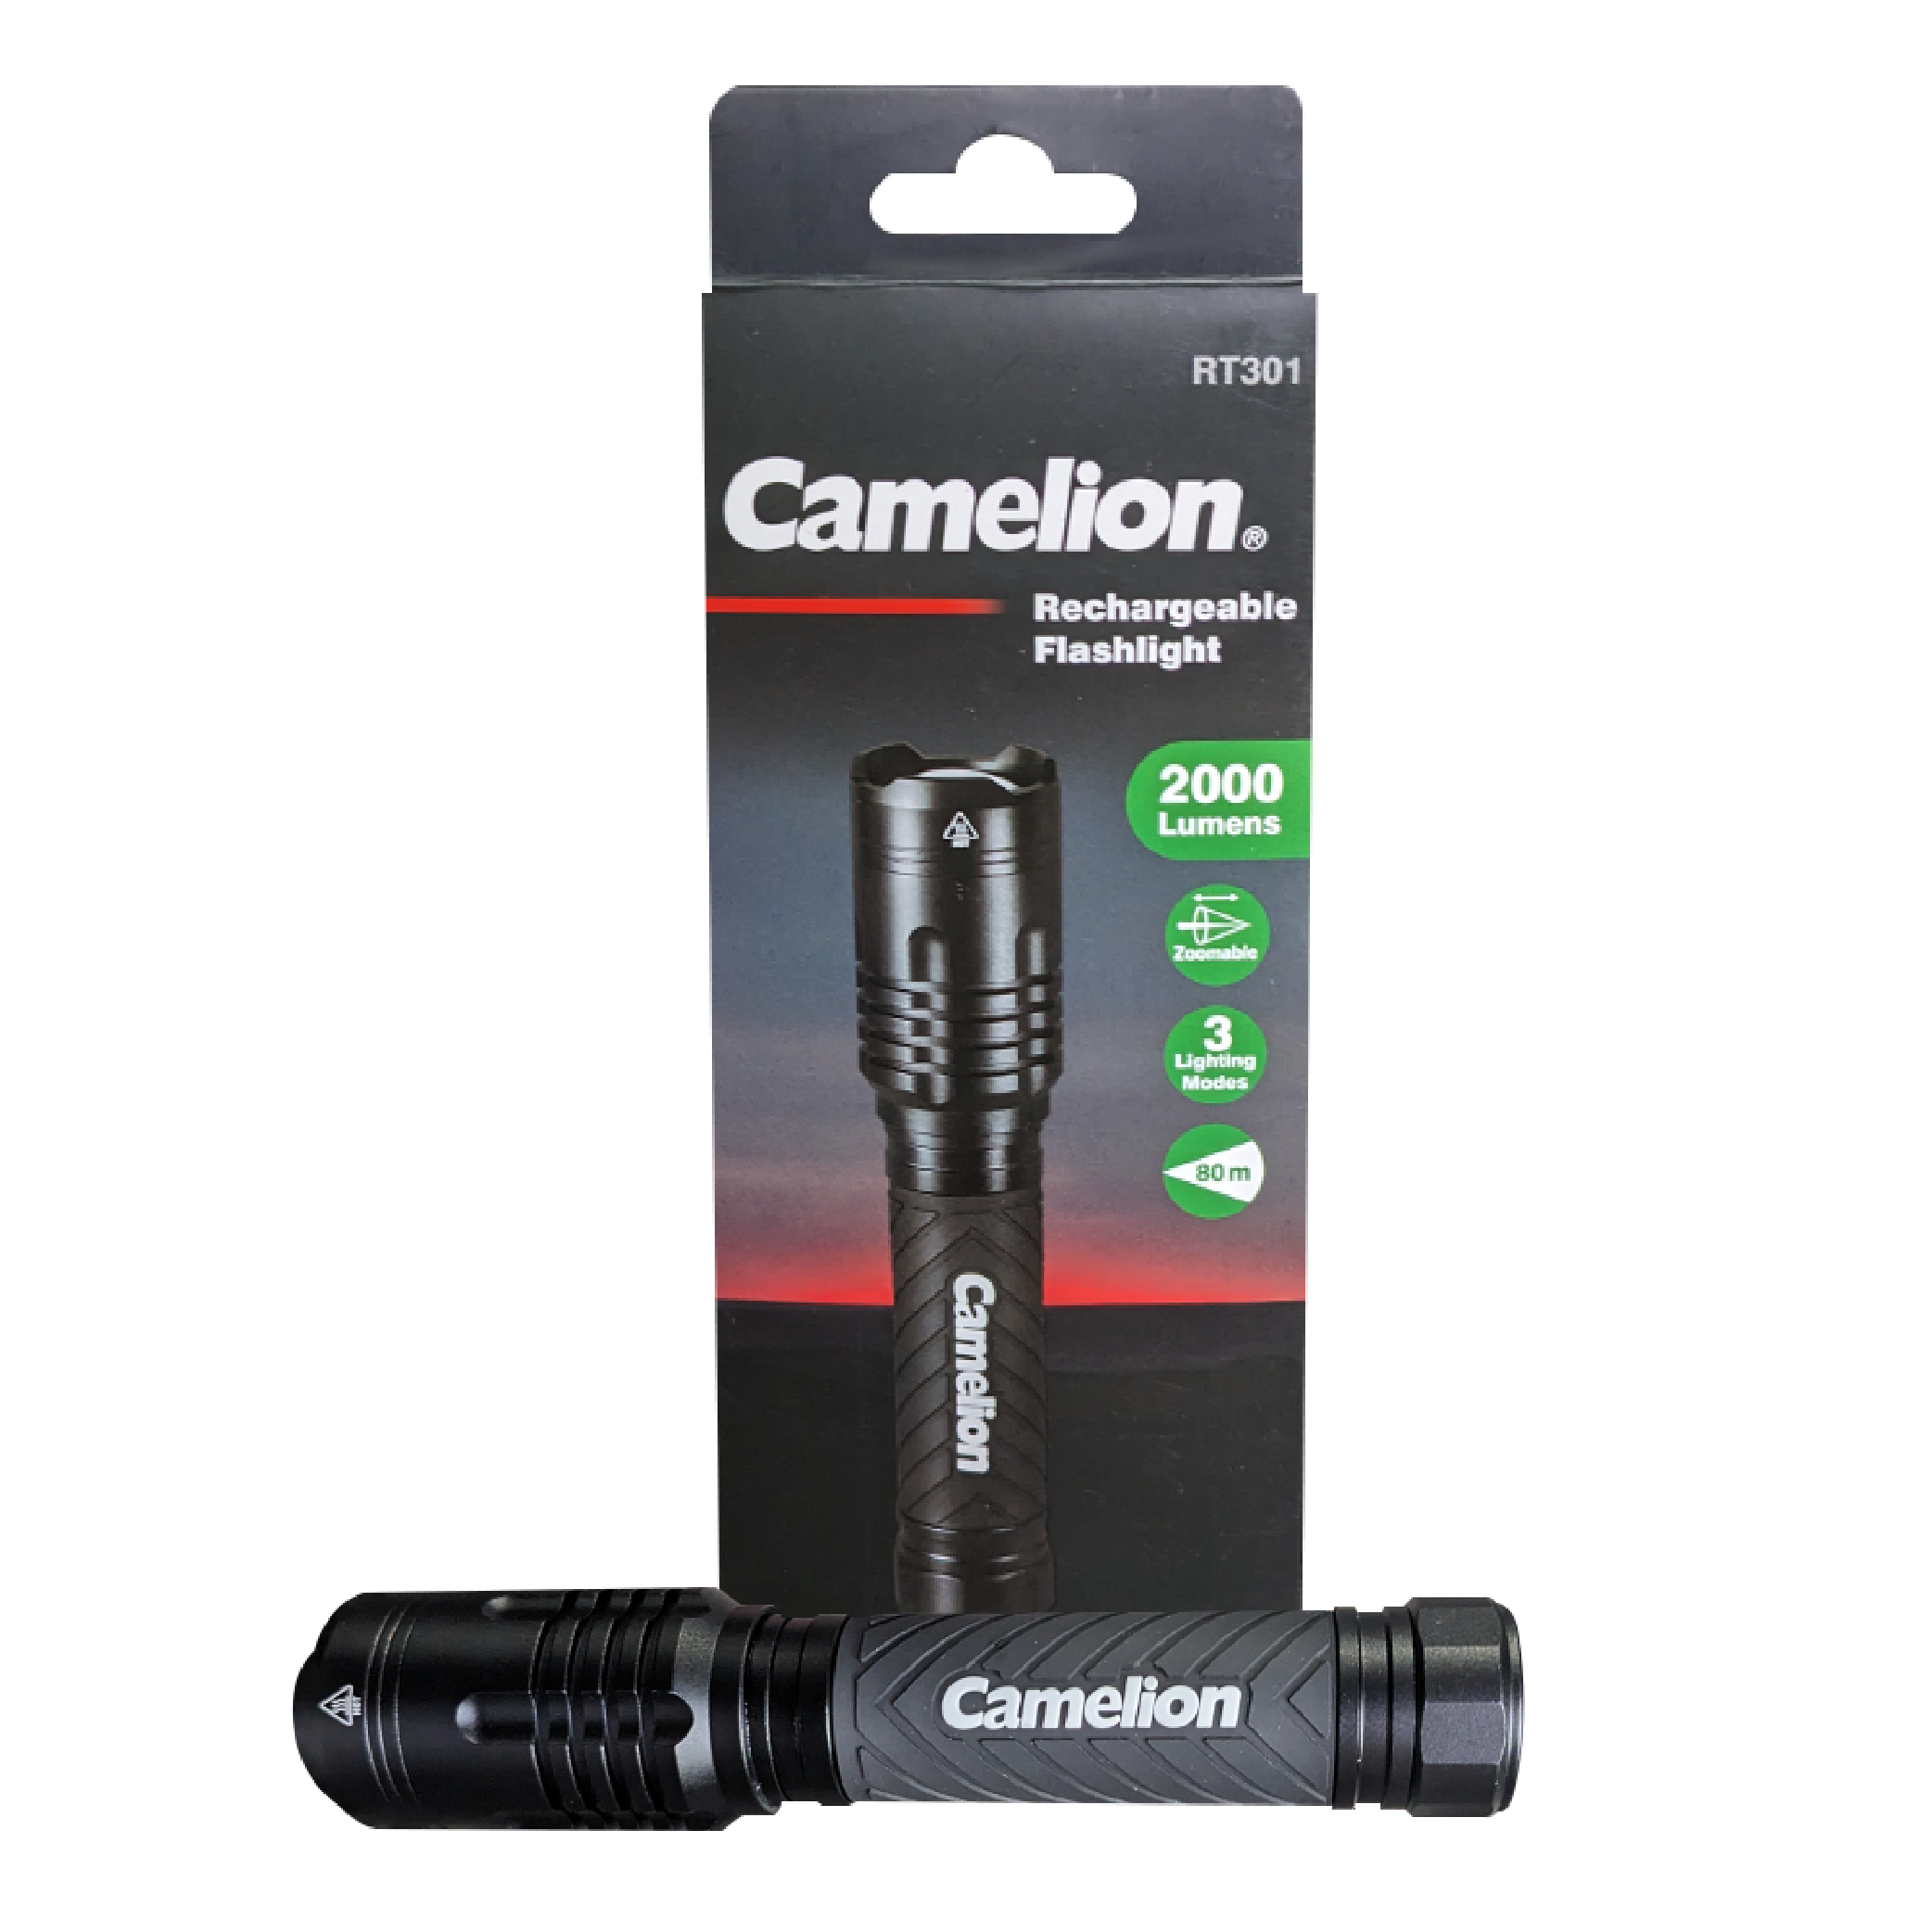 Camelion RT301 34W COB 2000LM Rechargeable Flashlight - 3 Lighting Modes